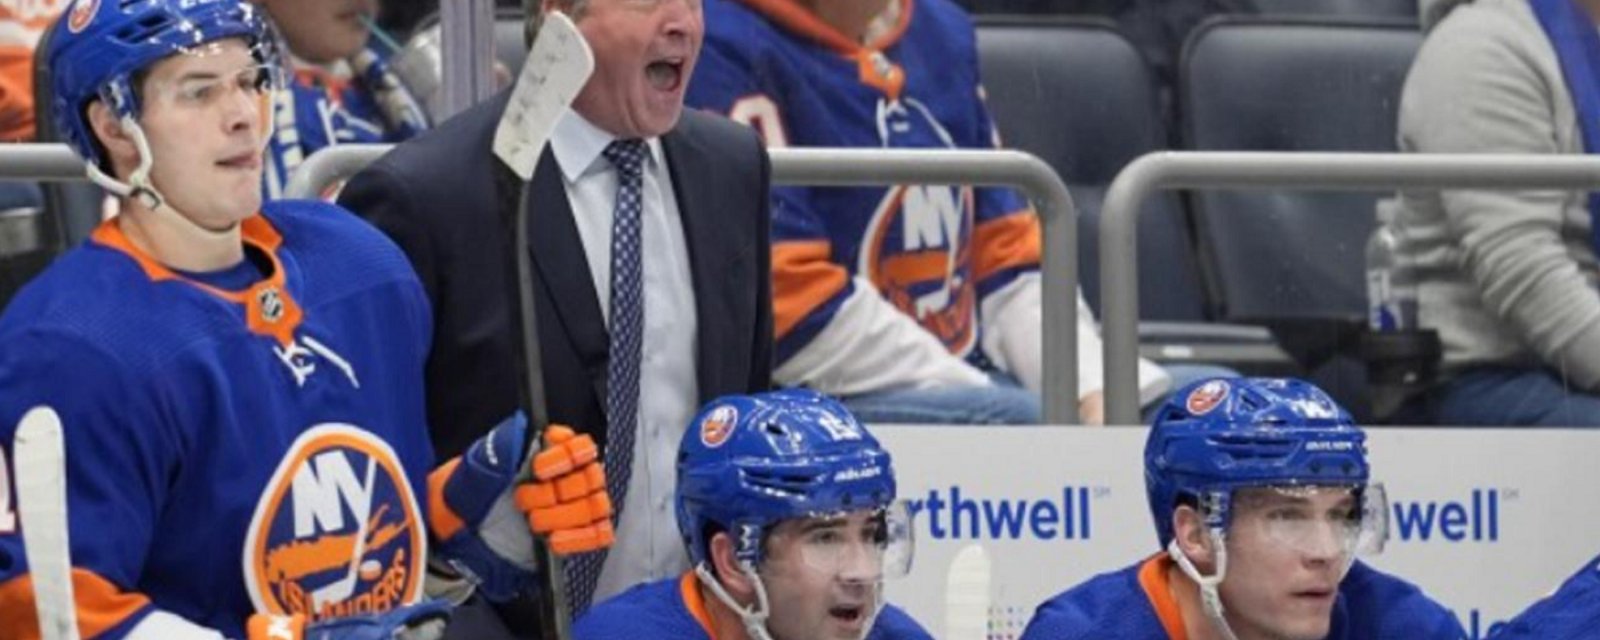 Patrick Roy reacts to his first win as coach of the Islanders.